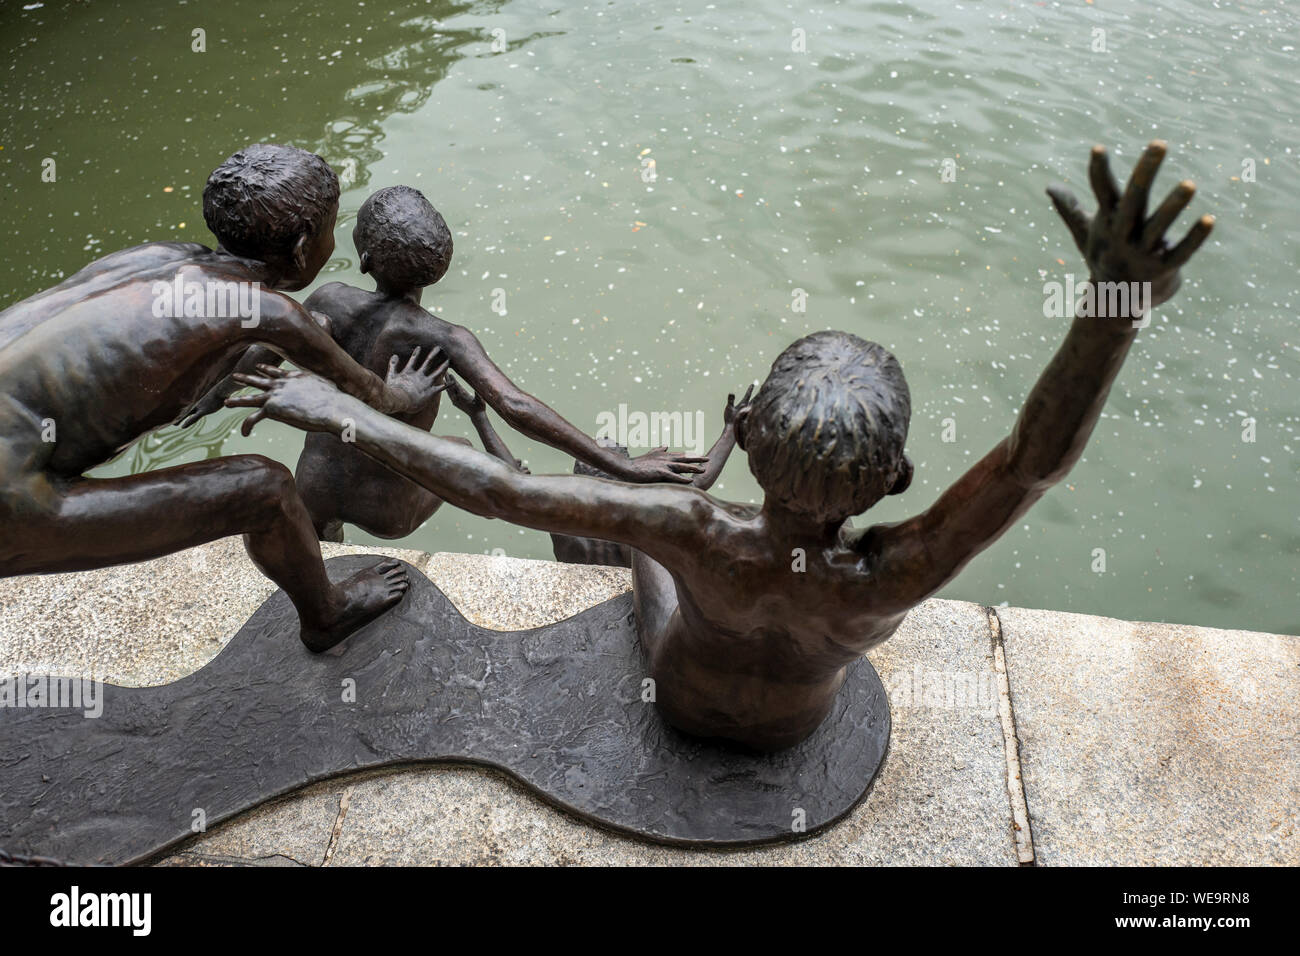 First Generation bronze sculptures as part of the People of the River series by artist Chong Fah Cheong on the Singapore River, Singapore Stock Photo